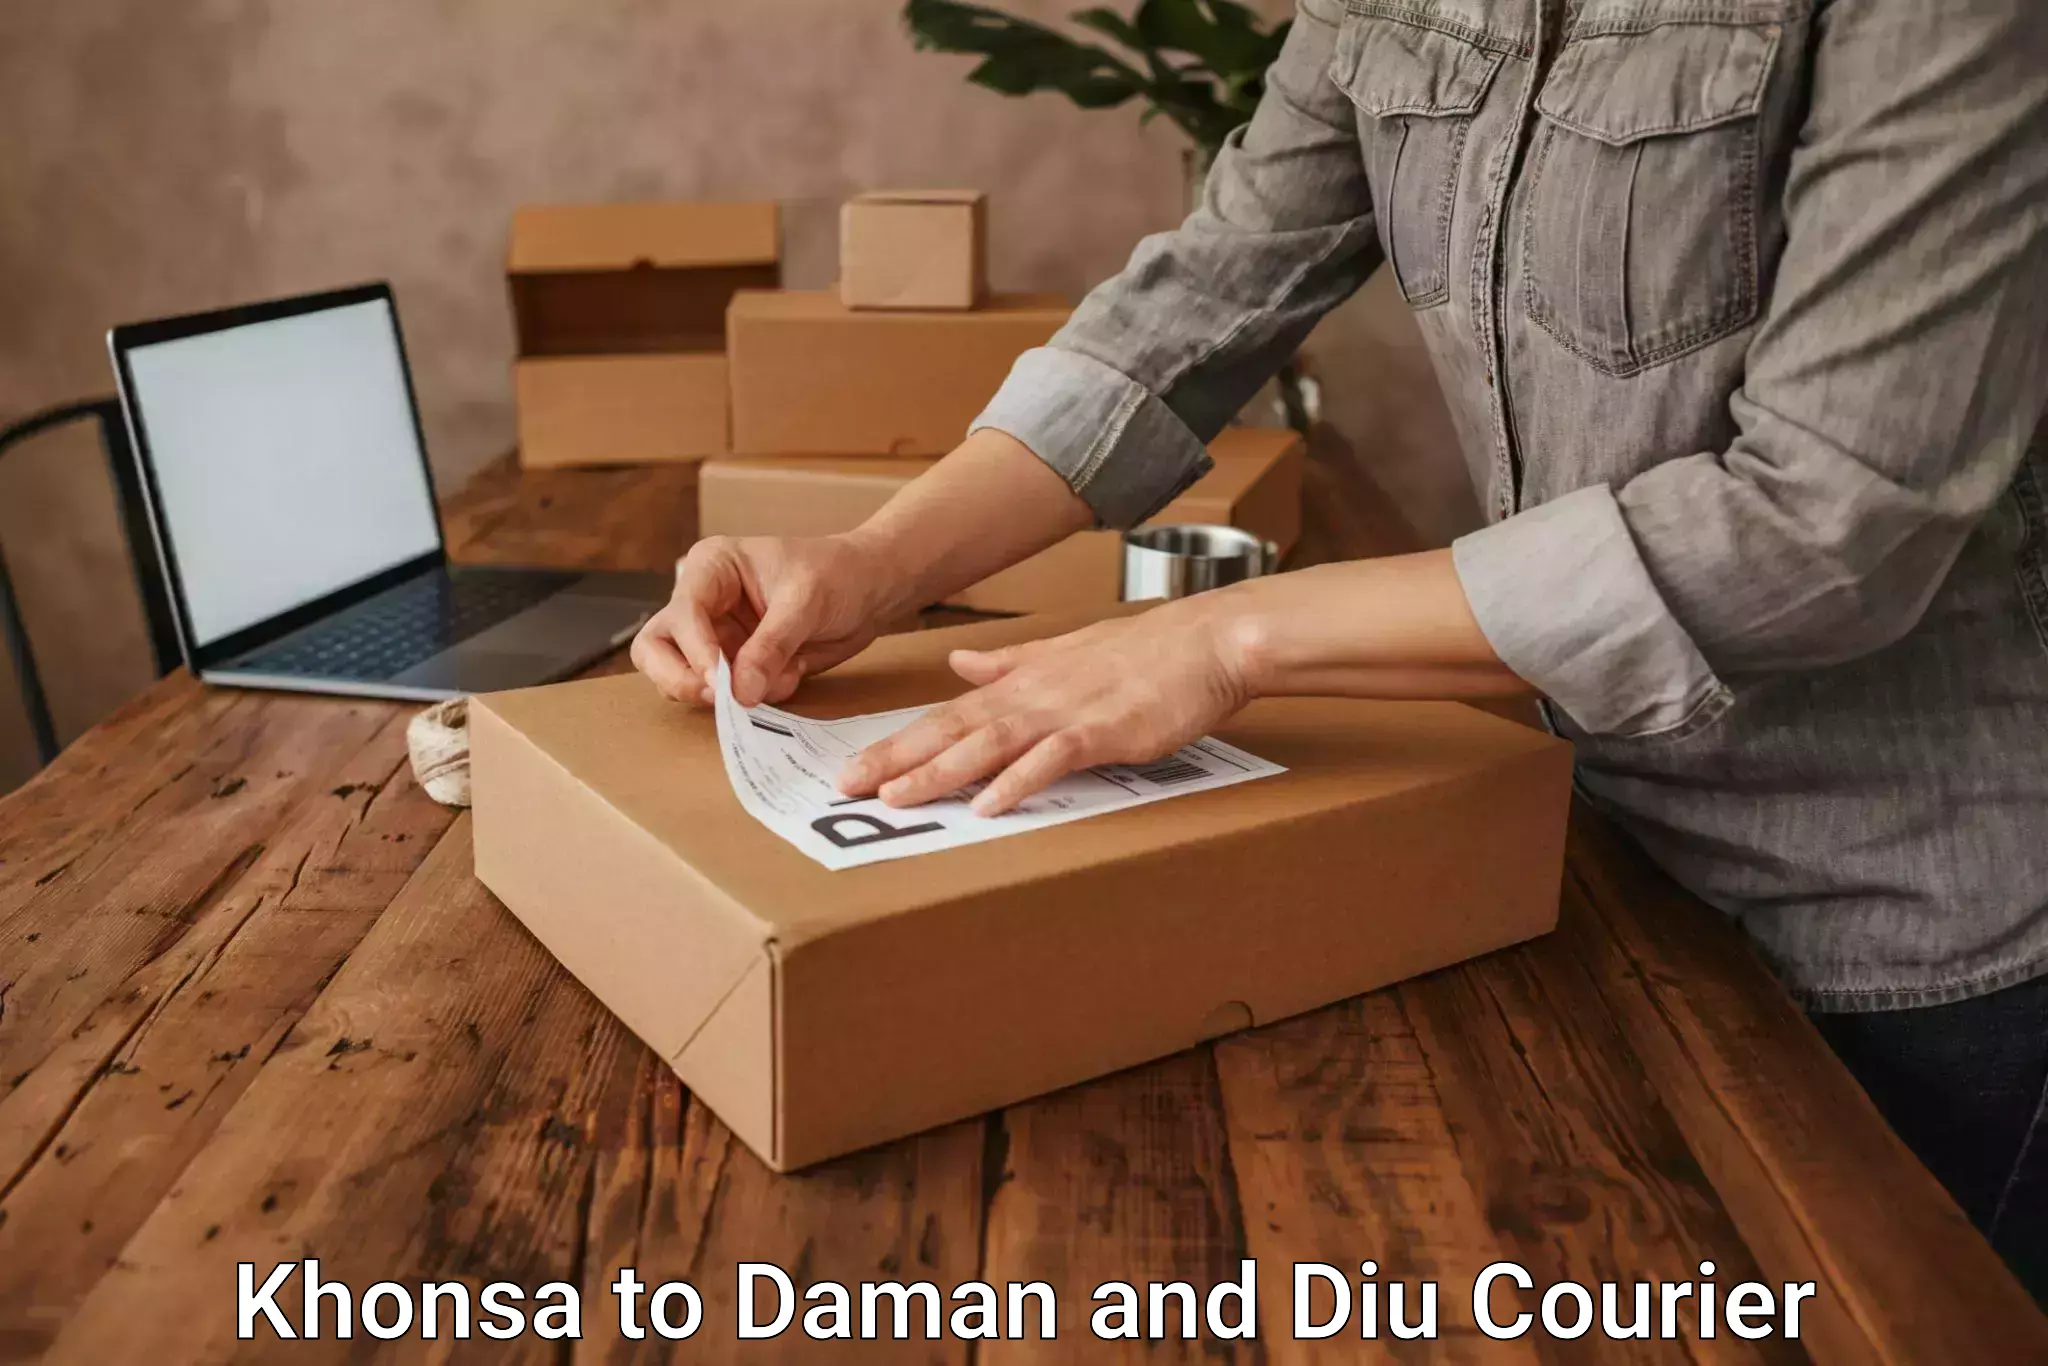 Flexible delivery scheduling Khonsa to Daman and Diu